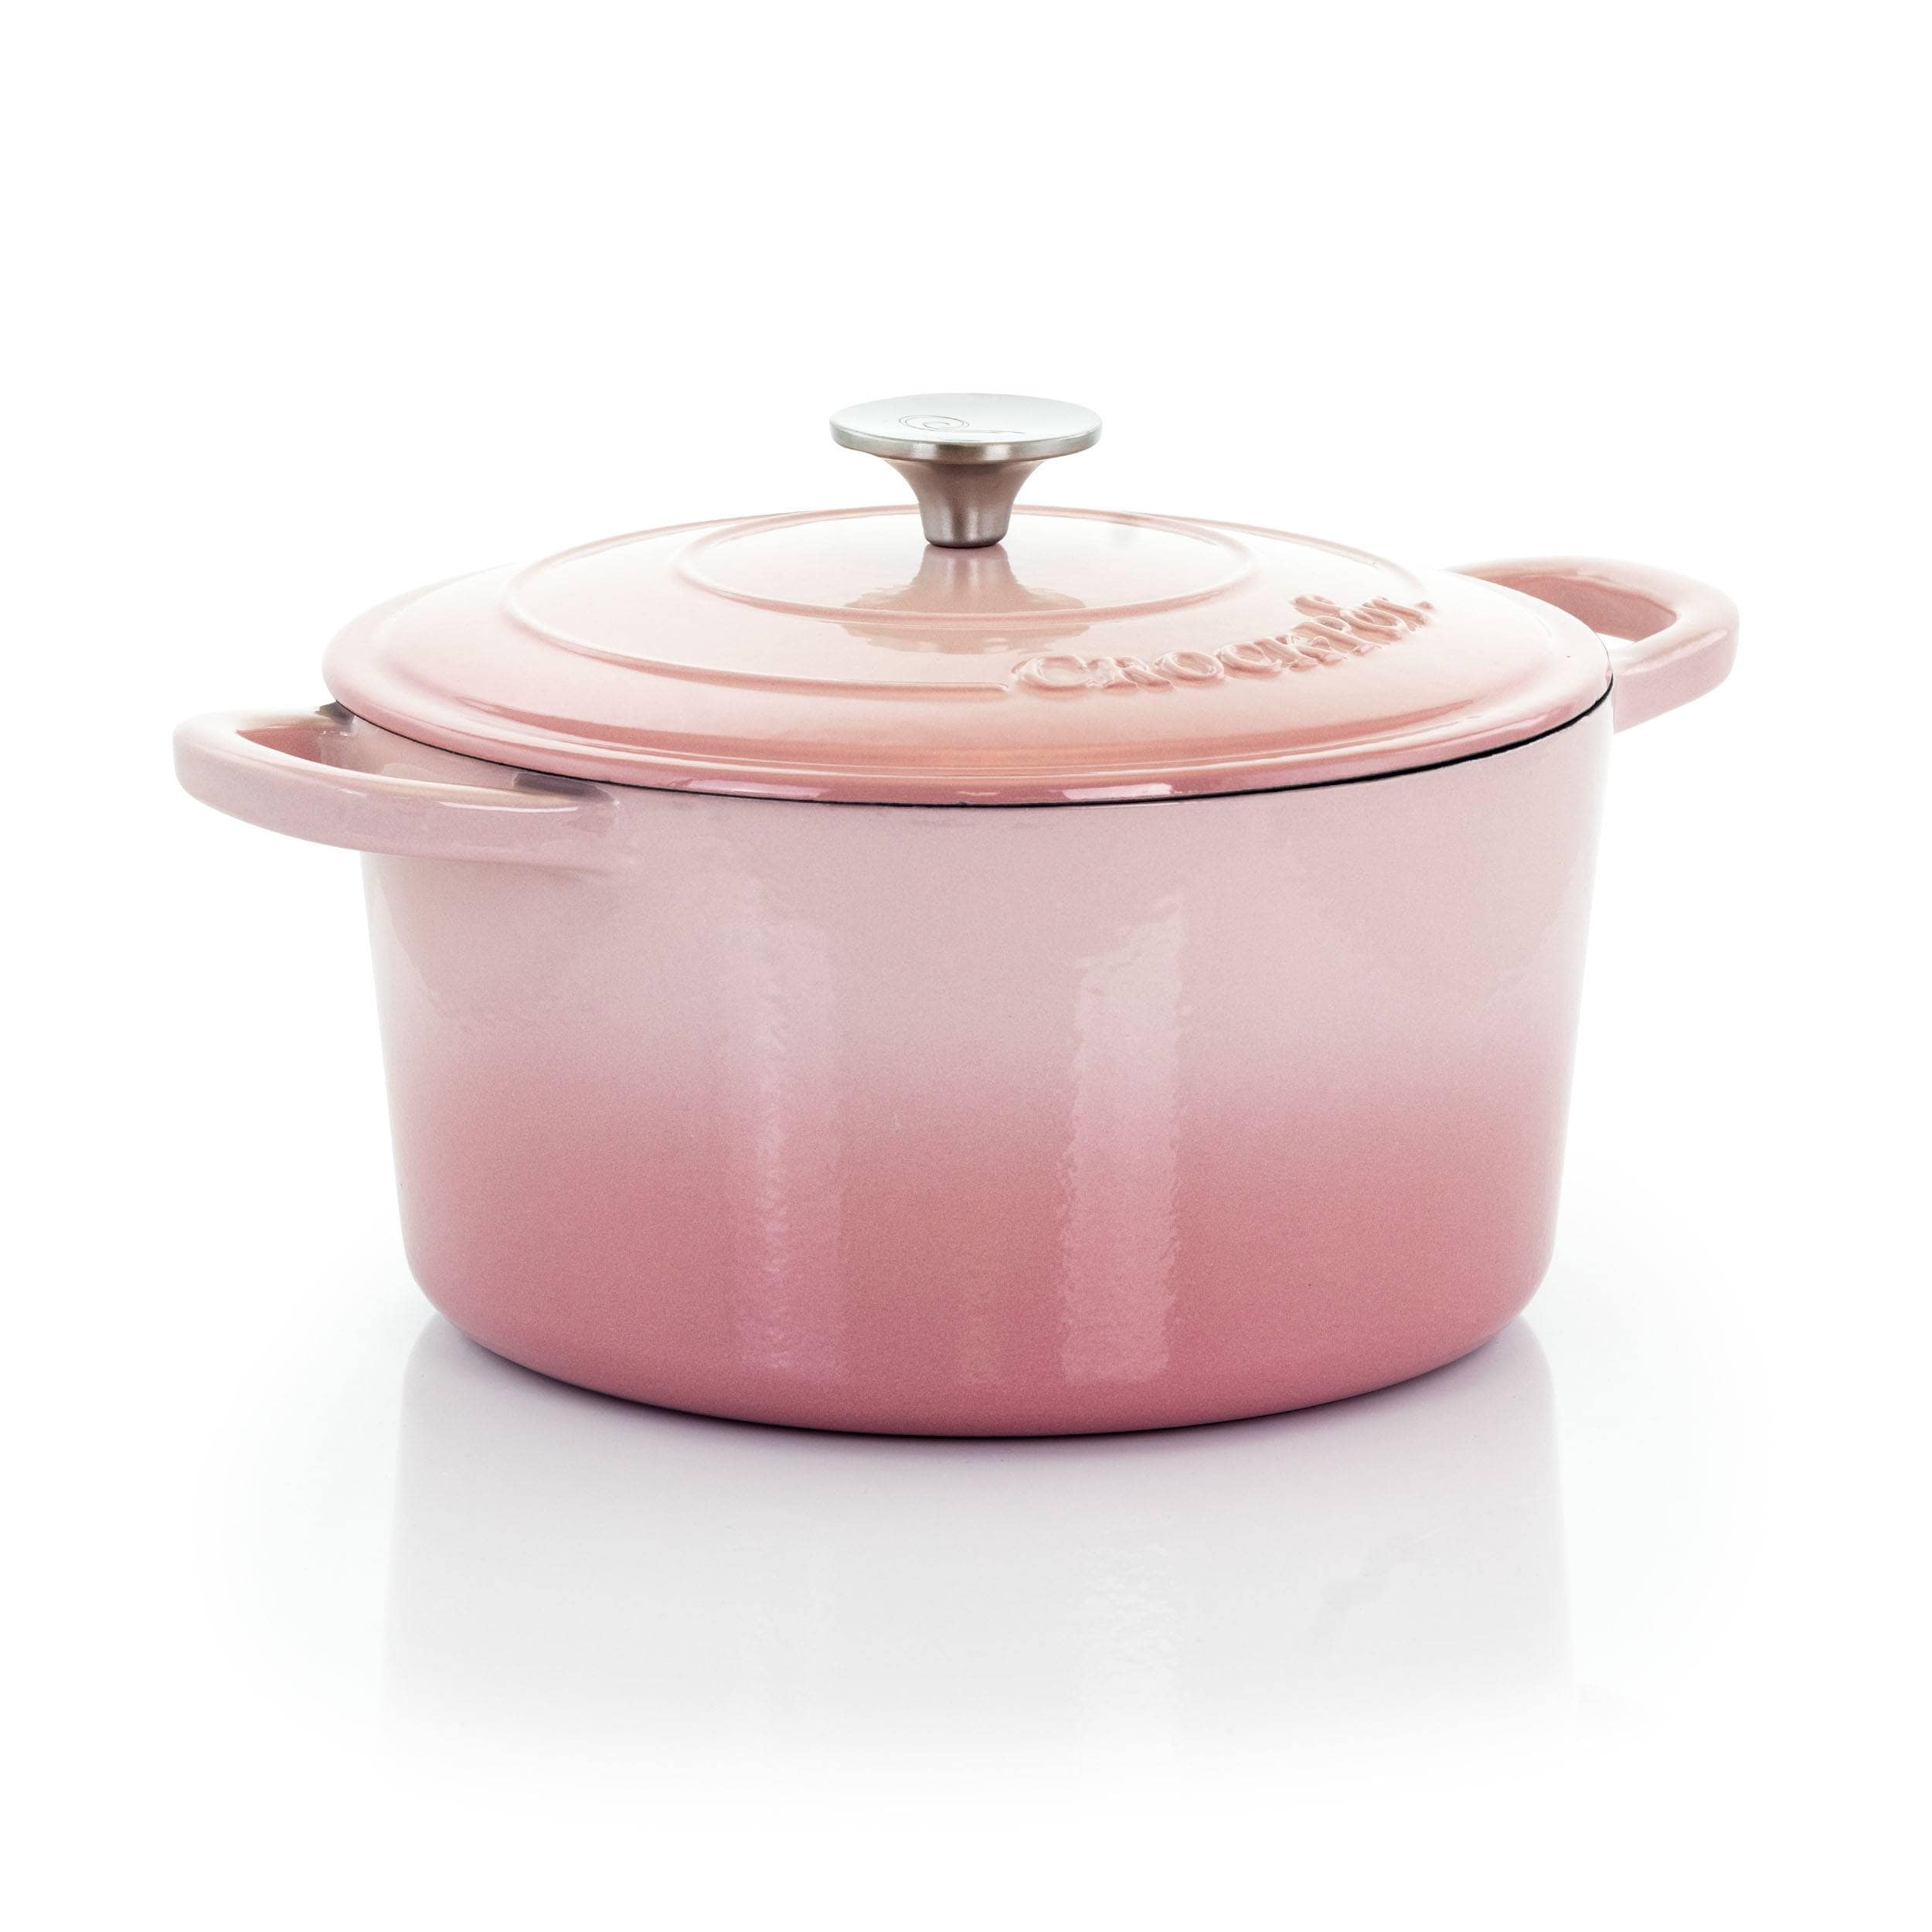 Crock-Pot Artisan 5 Quart Enamled Cast Iron Dutch Oven with Lid in